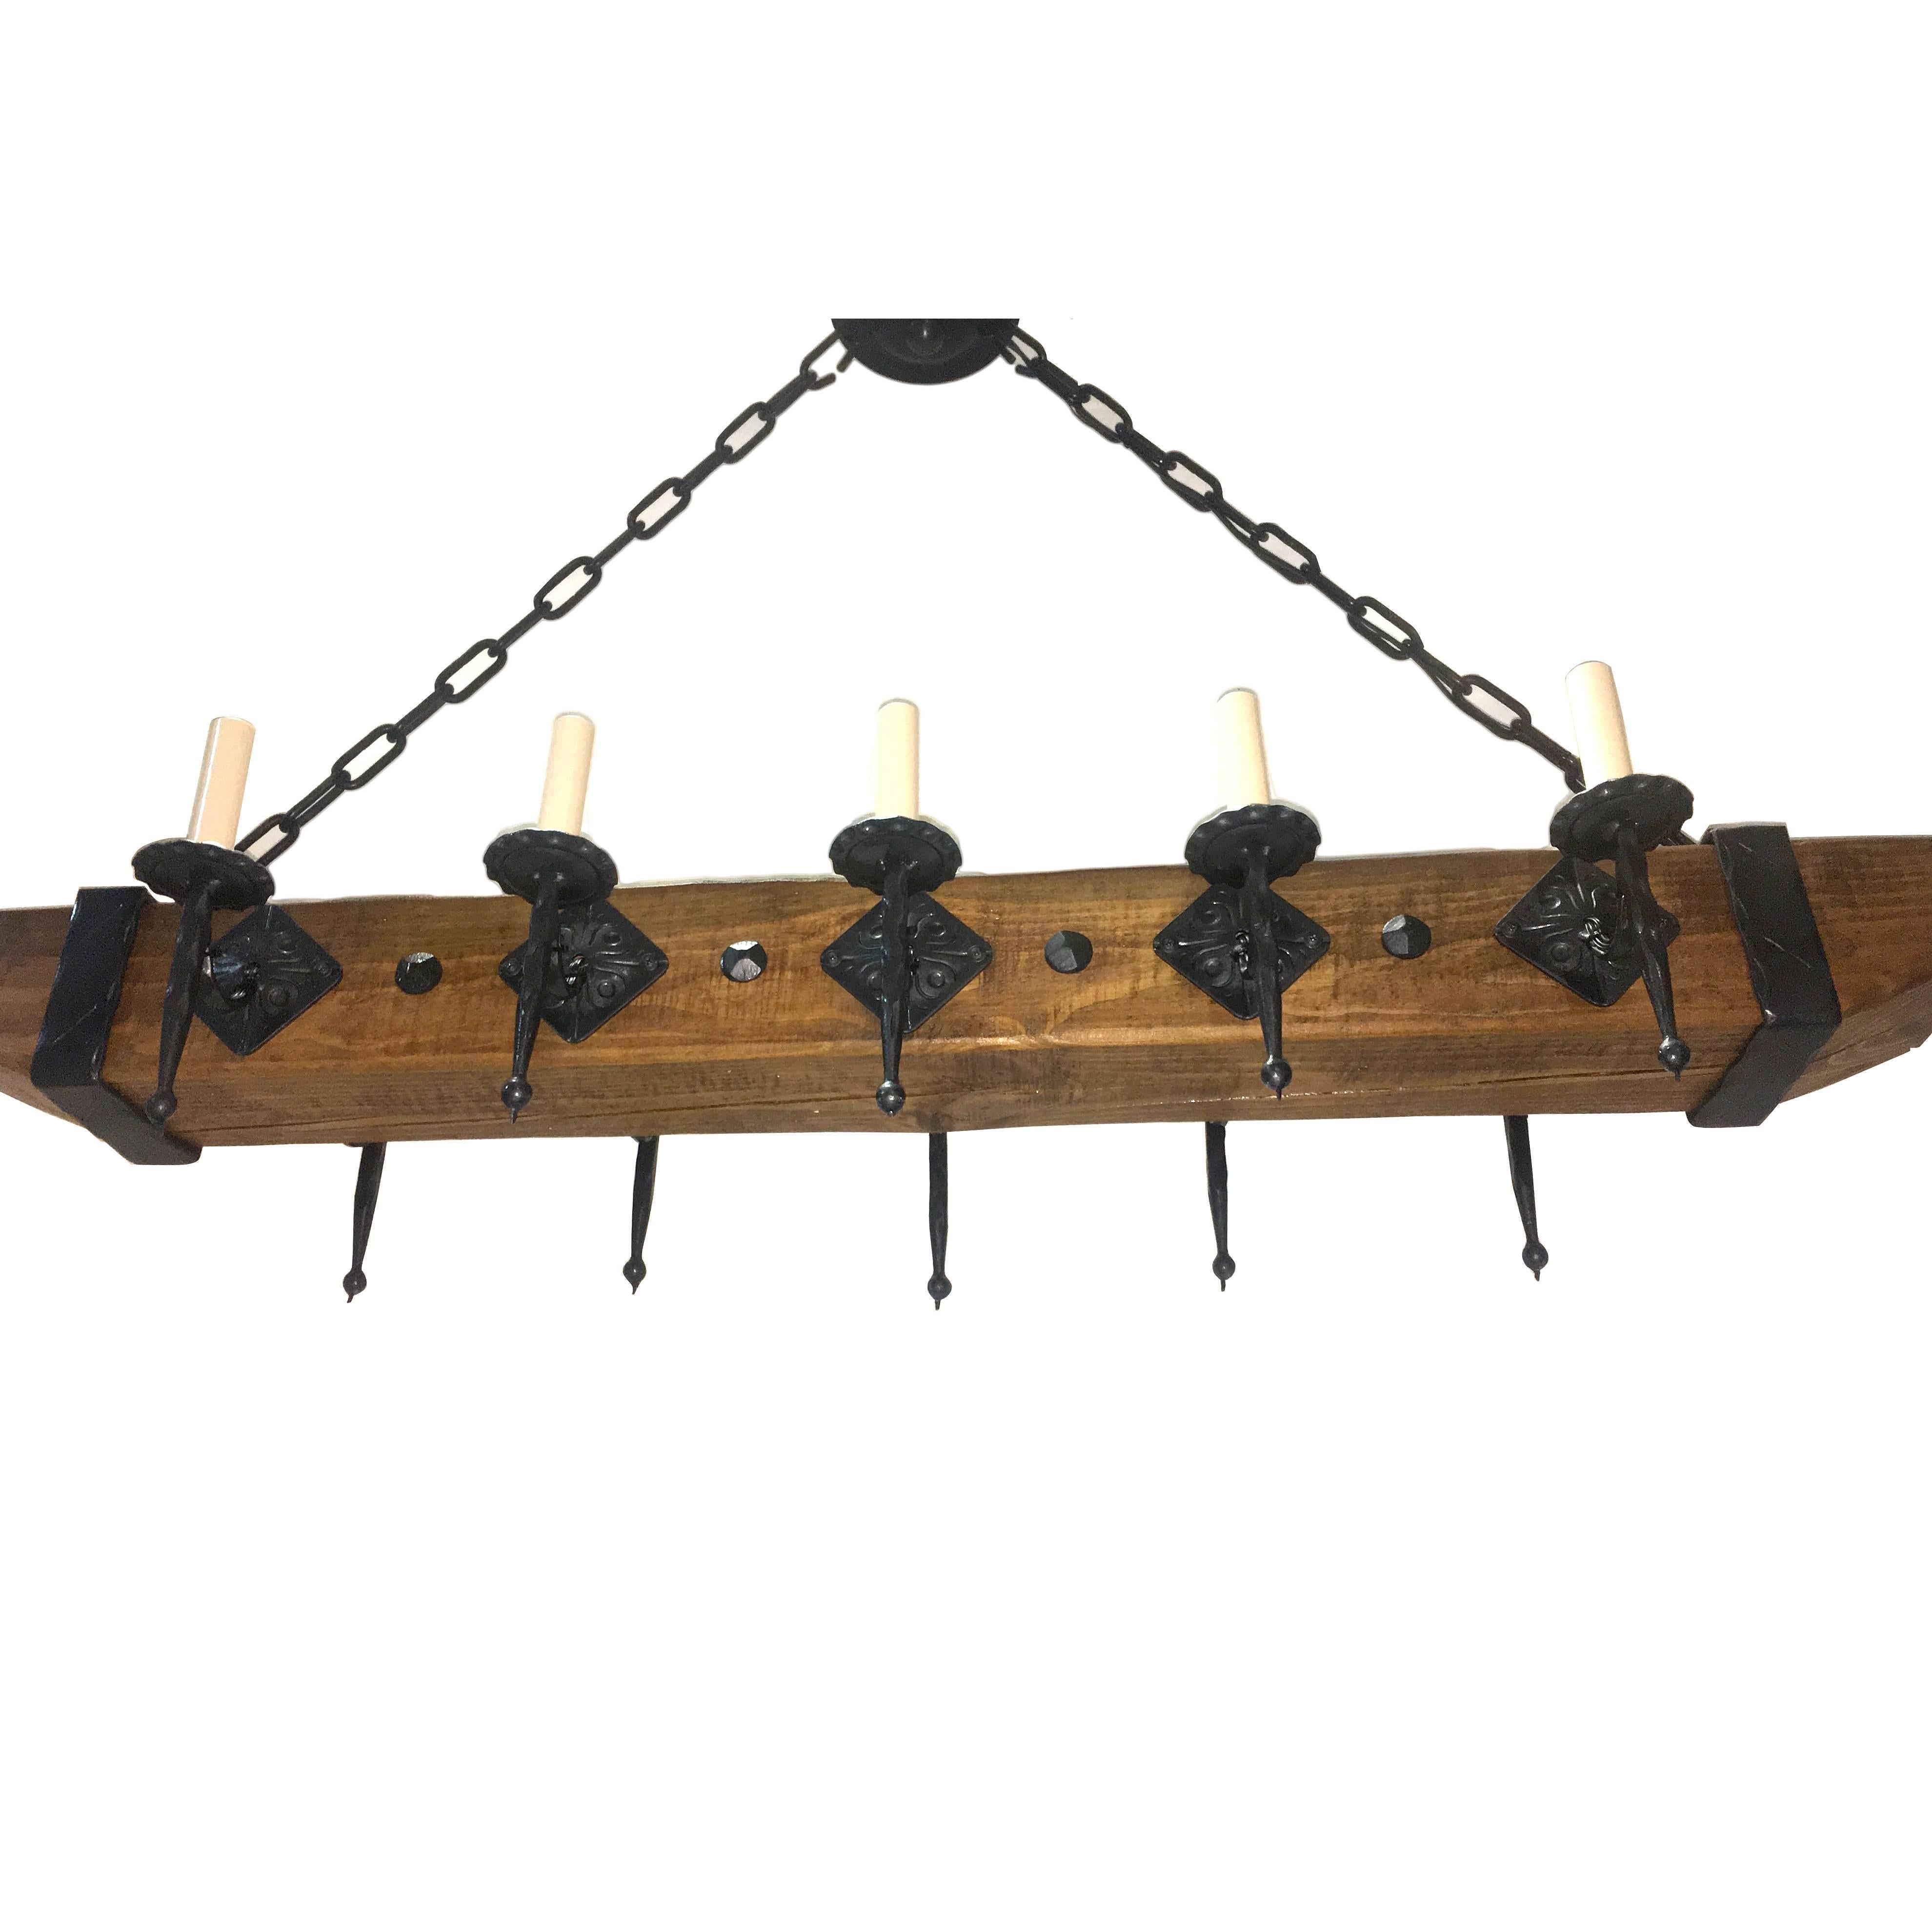 A circa 1940's French wrought iron chandelier with wooden body.

Measurements:
Drop: 30.5